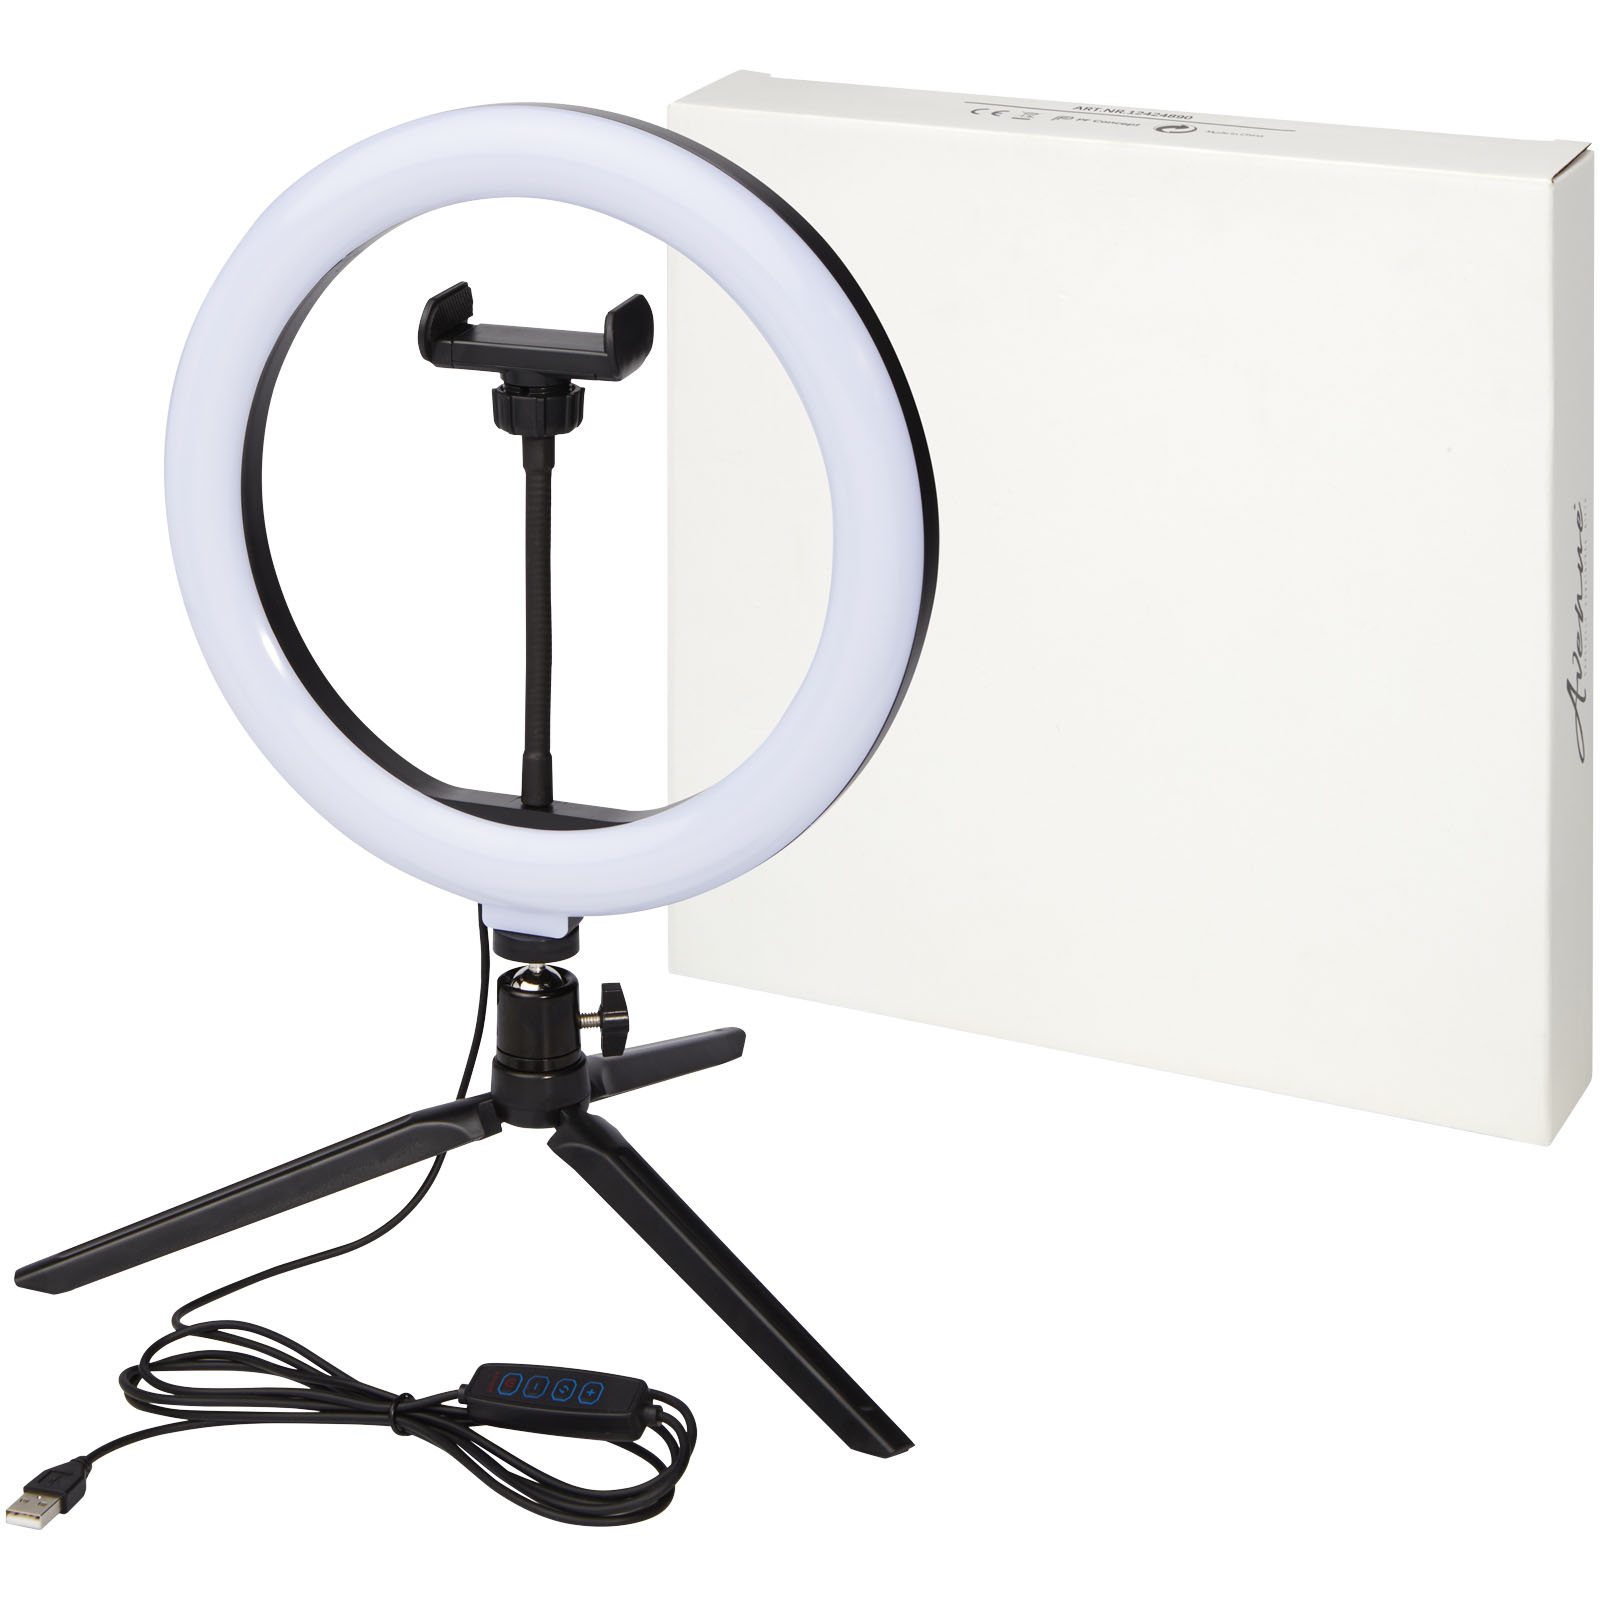 Advertising Telephone & Tablet Accessories - Studio ring light for selfies and vlogging with phone holder and tripod - 6